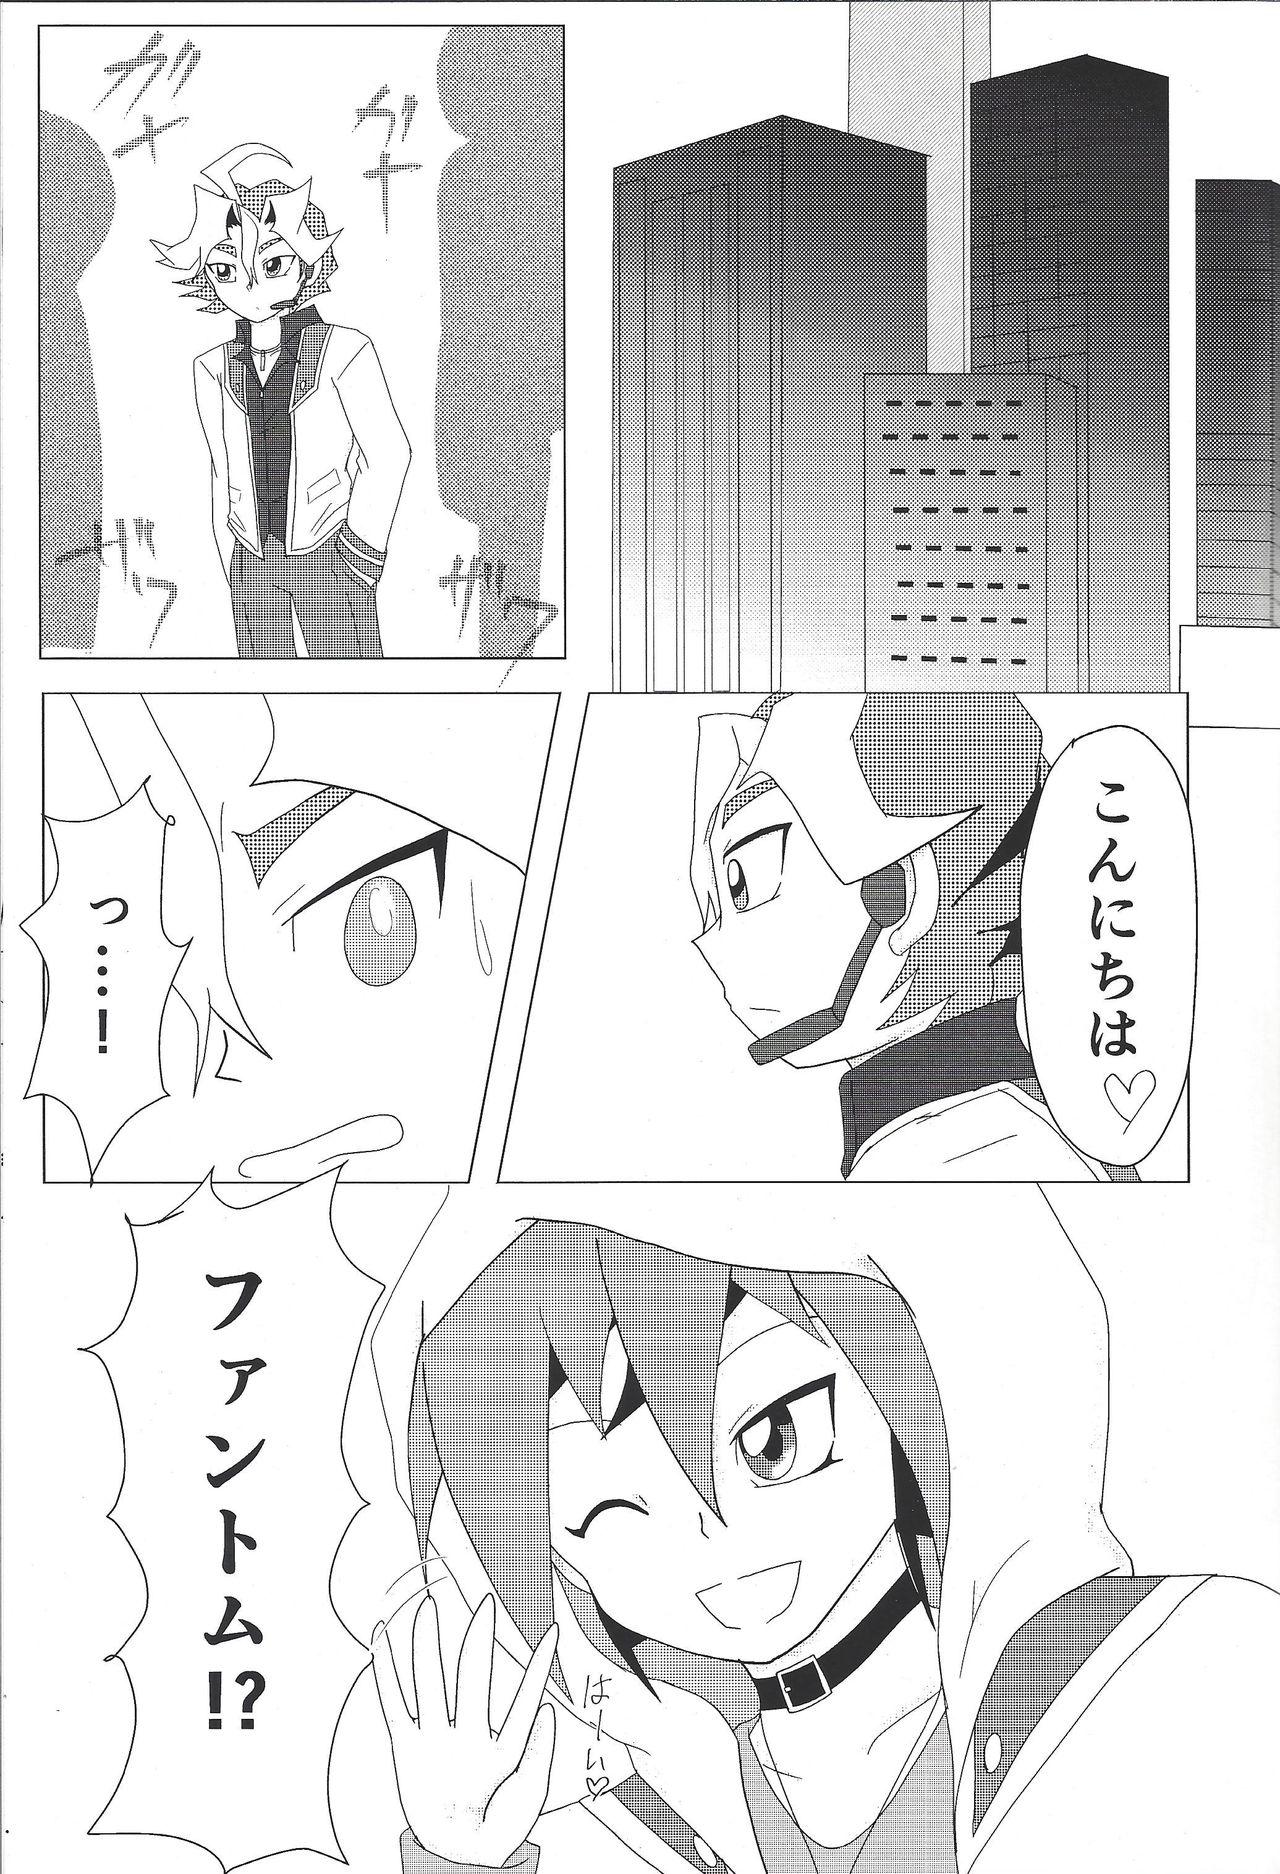 Seduction What you are, What you do, What you say - Yu-gi-oh arc-v Wild - Page 3